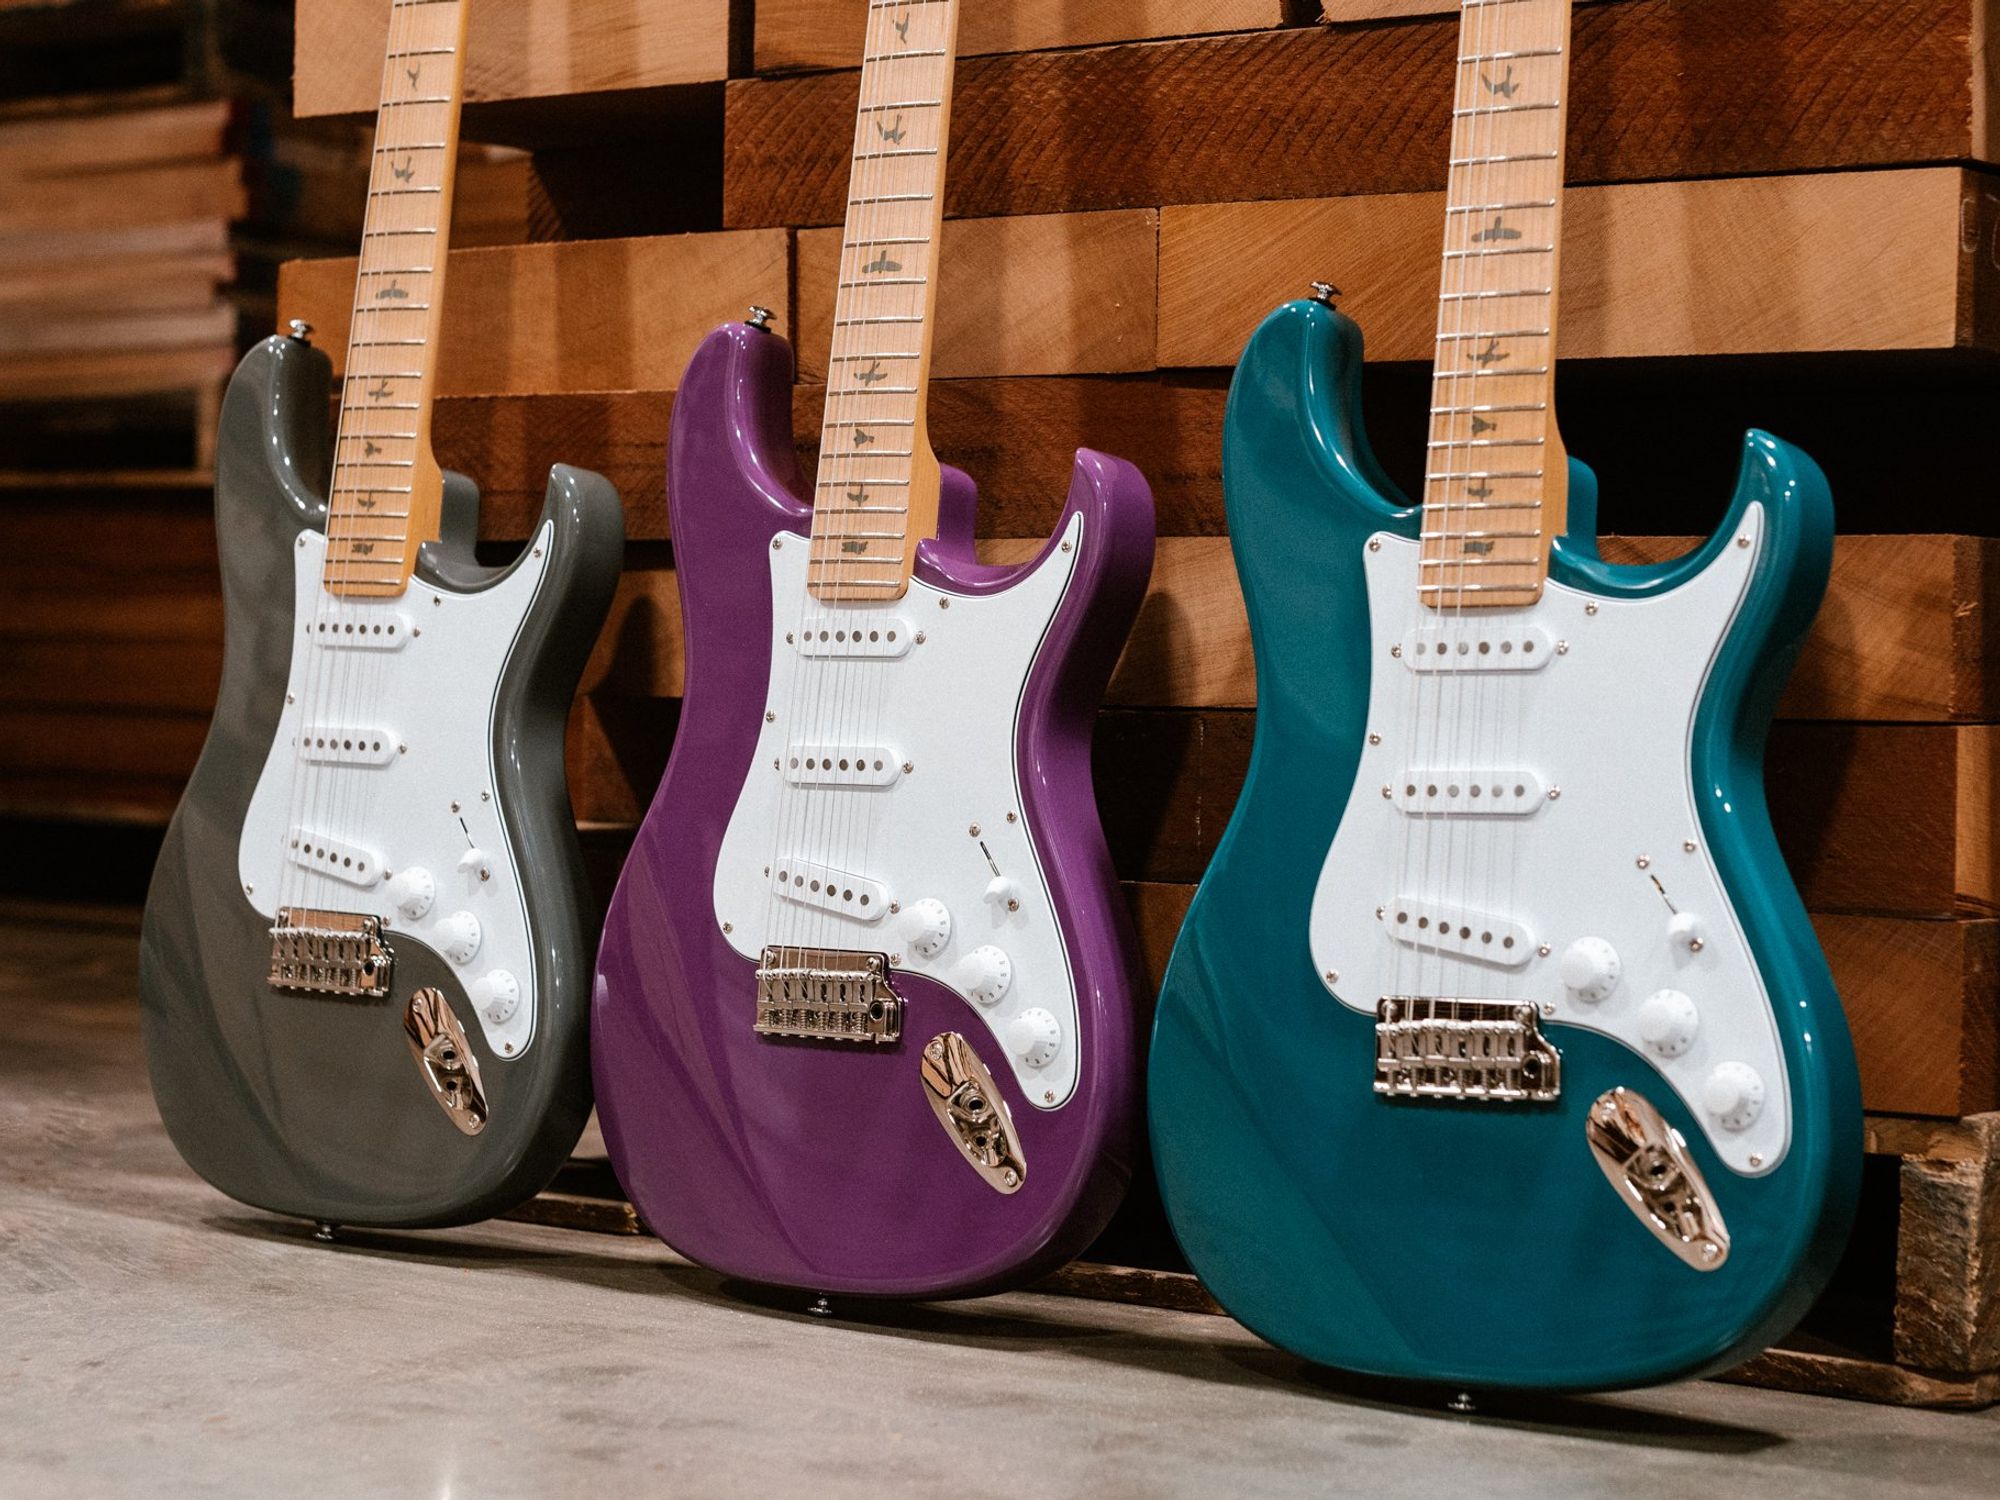 PRS Expands SE Silver Sky Offerings with Maple Fretboard and New Colors